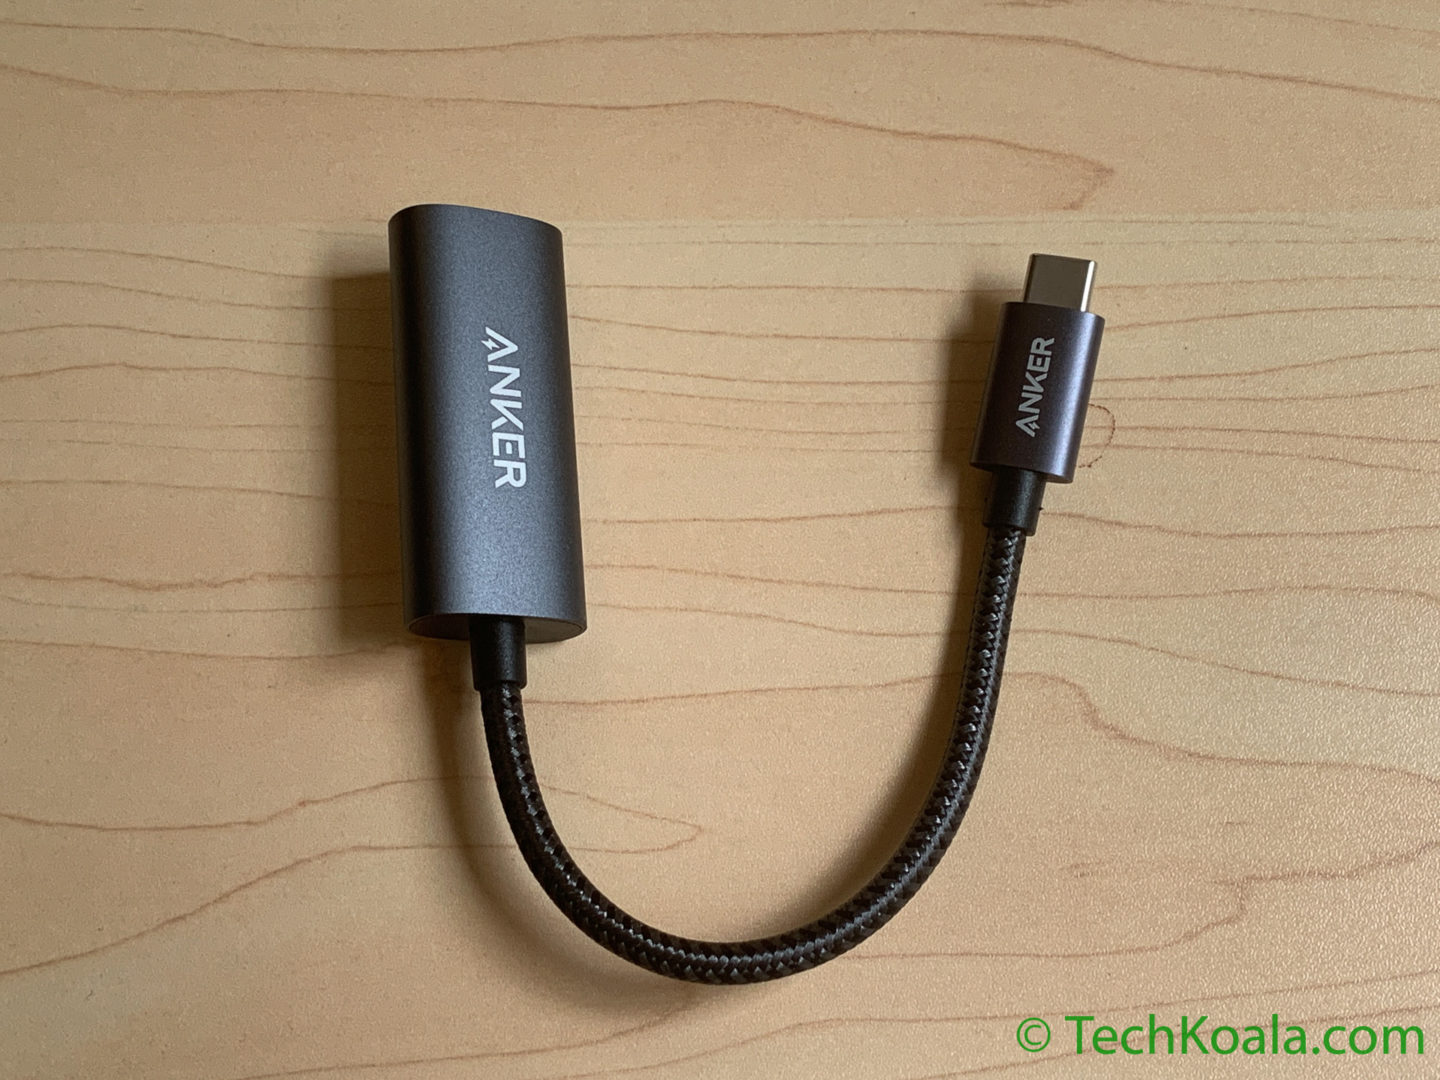 Anker USB-C to HDMI Adaptor